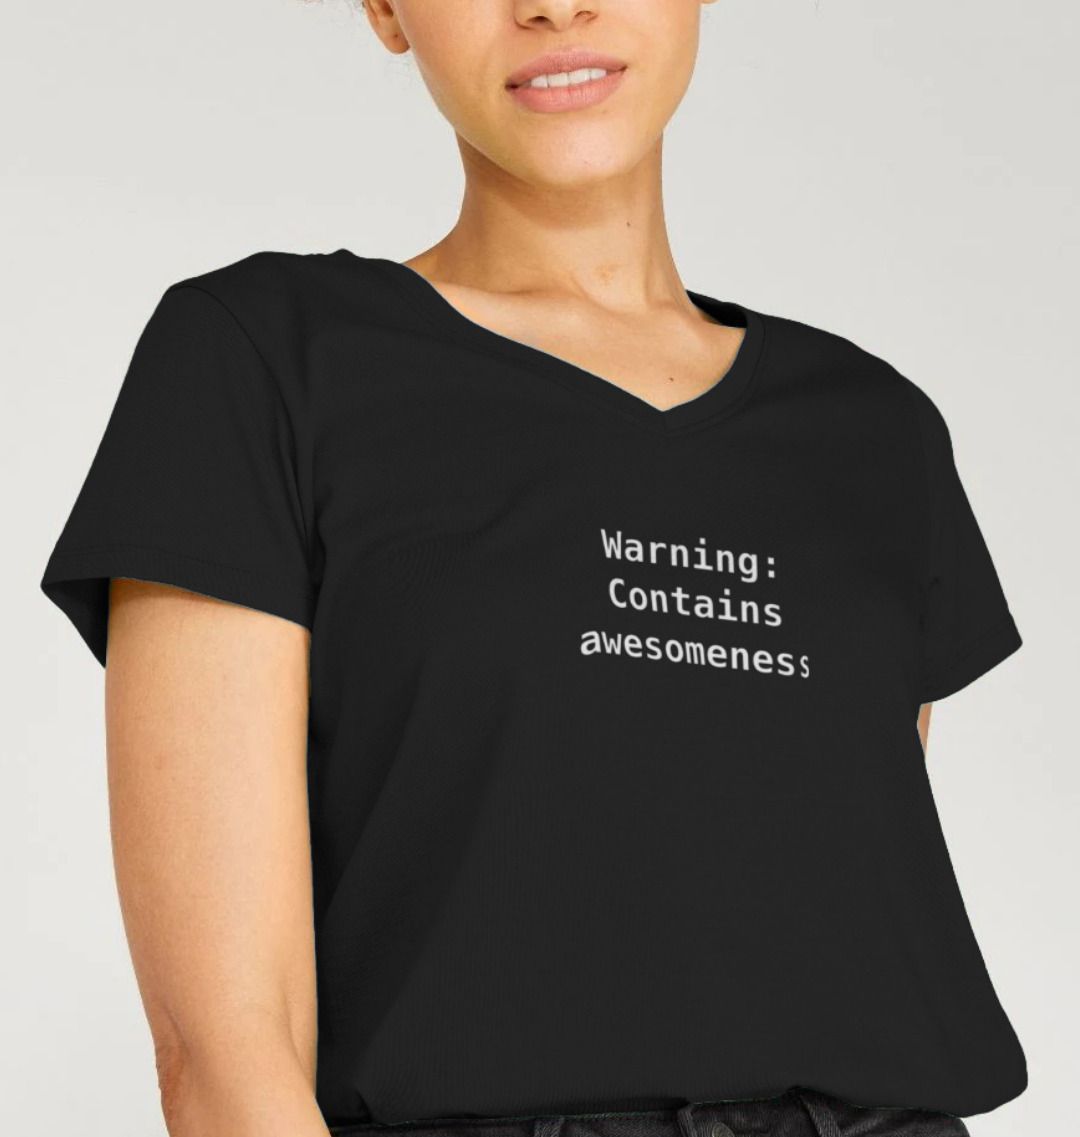 Warning: Contains awesomeness womens fit V neck T-shirt